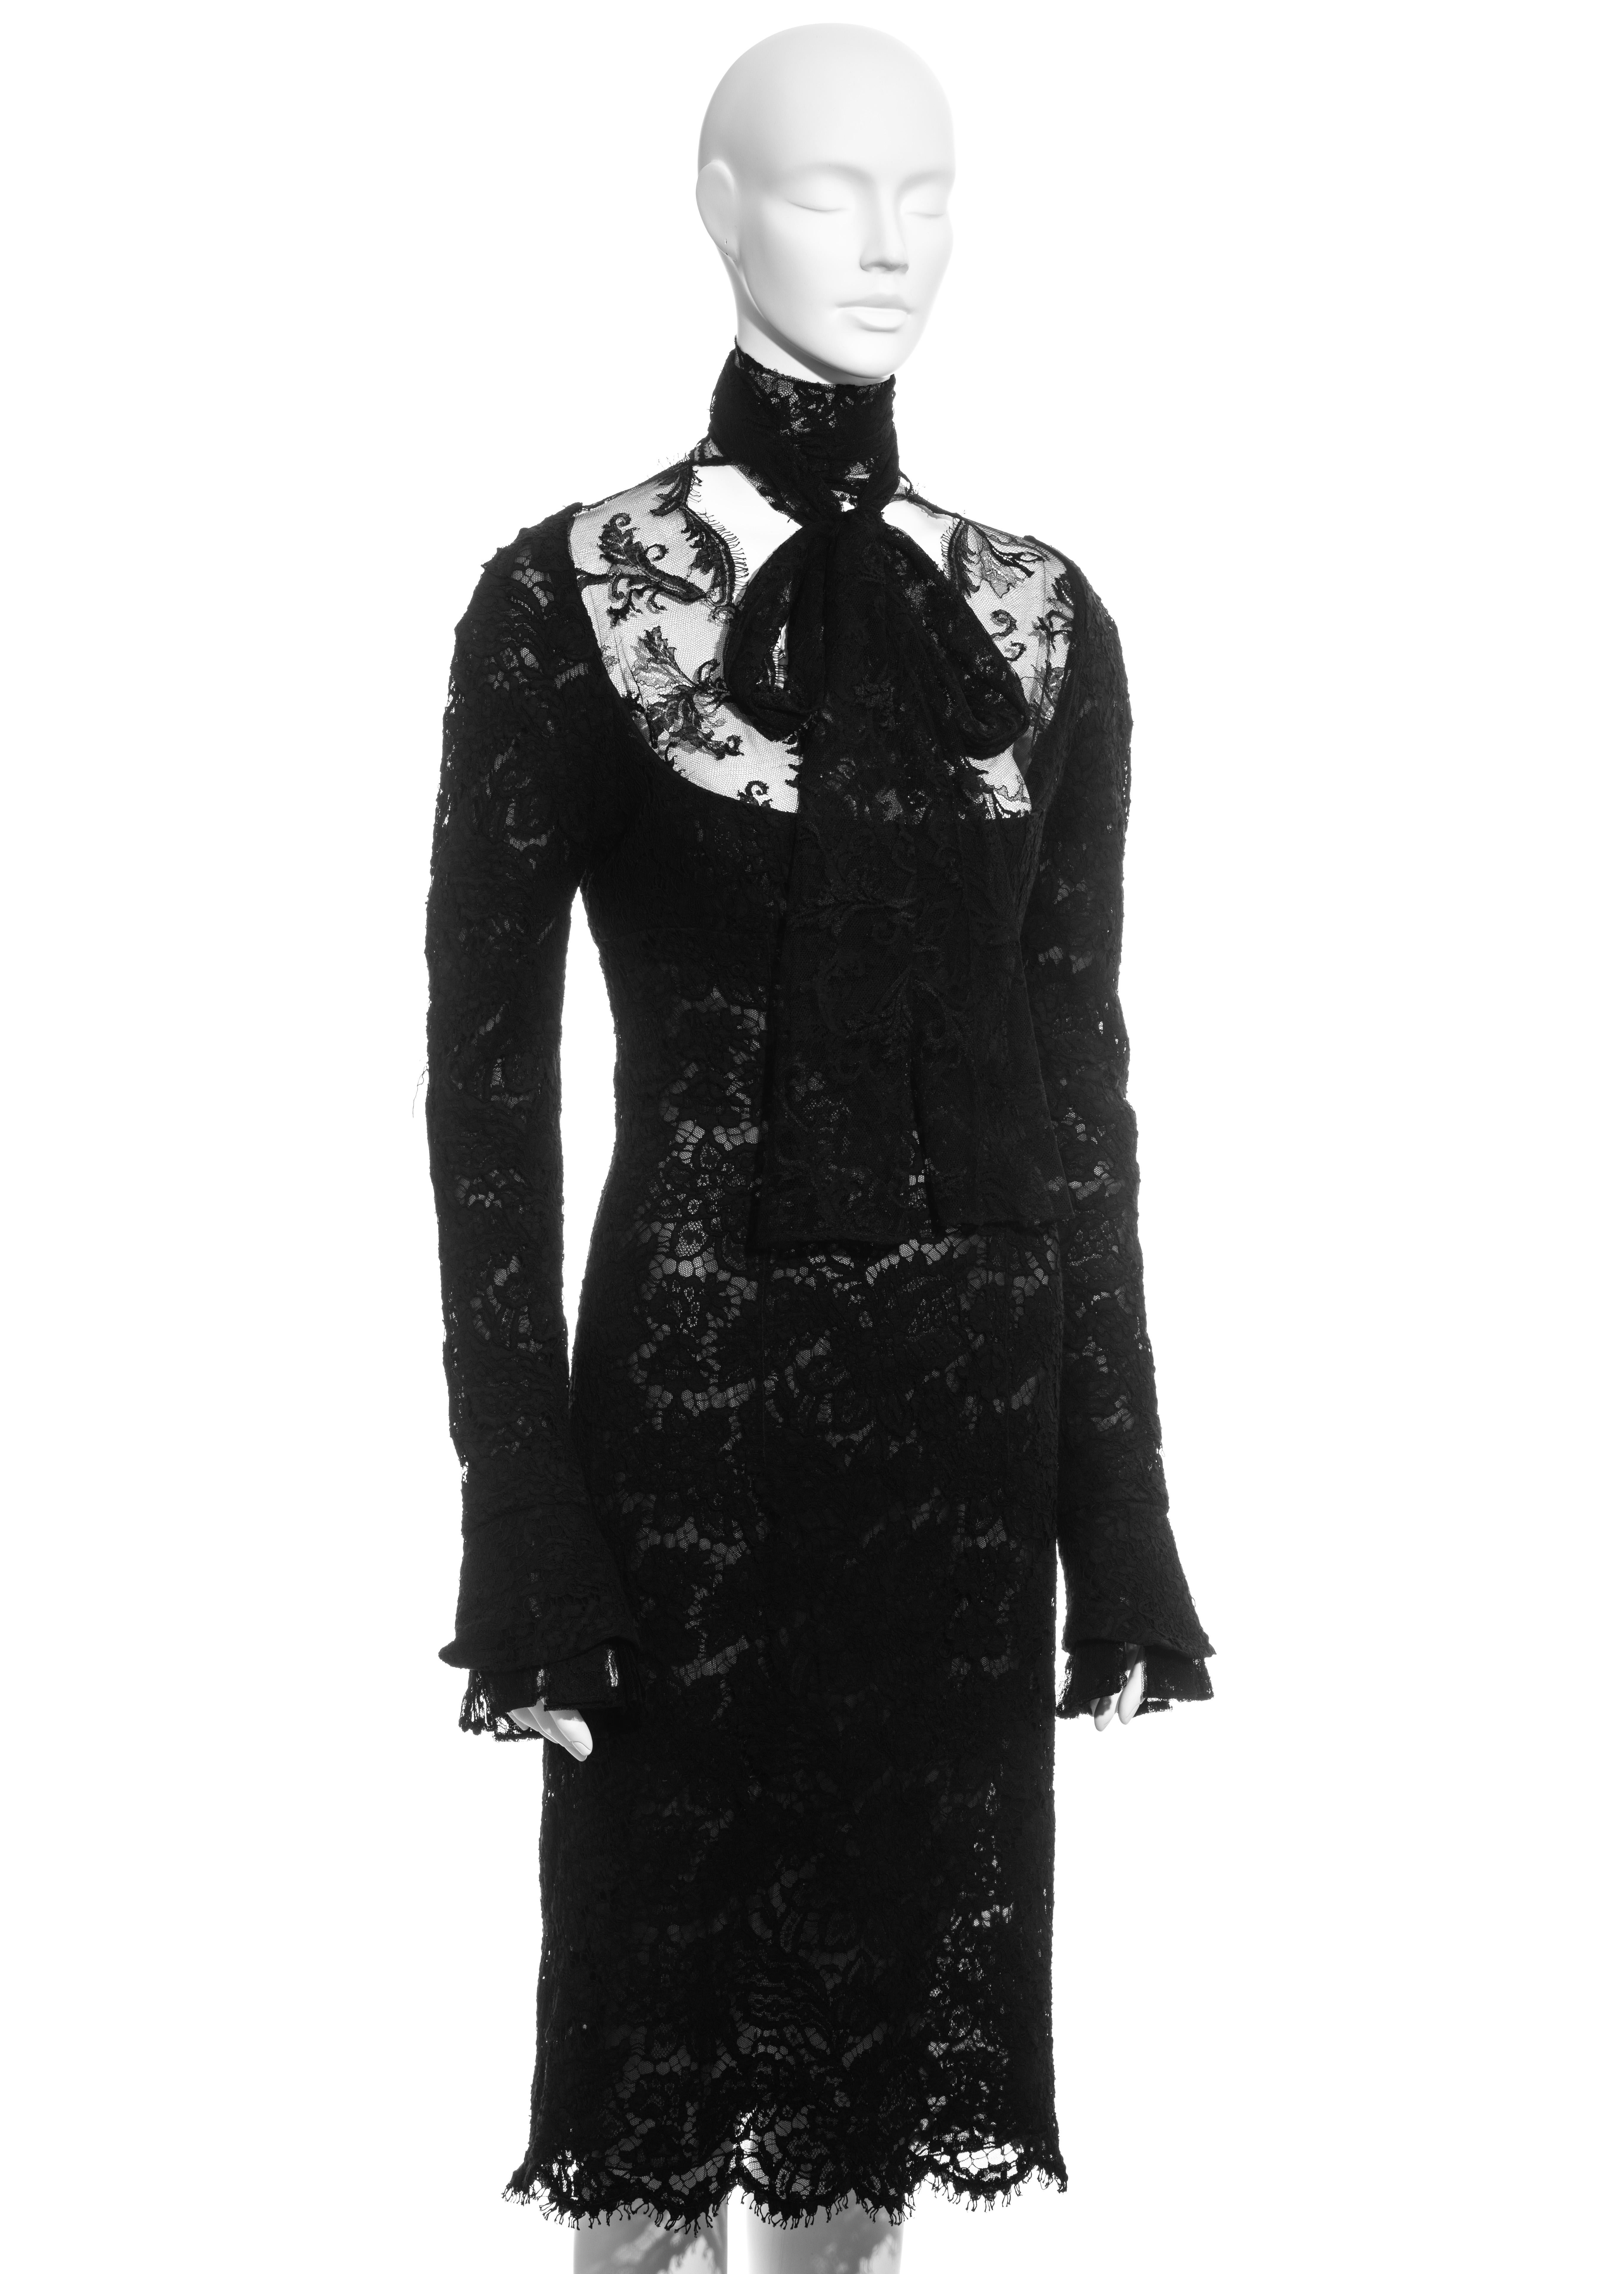 Yves Saint Laurent by Tom Ford black lace long-sleeve evening dress, fw 2002 In Excellent Condition For Sale In London, GB